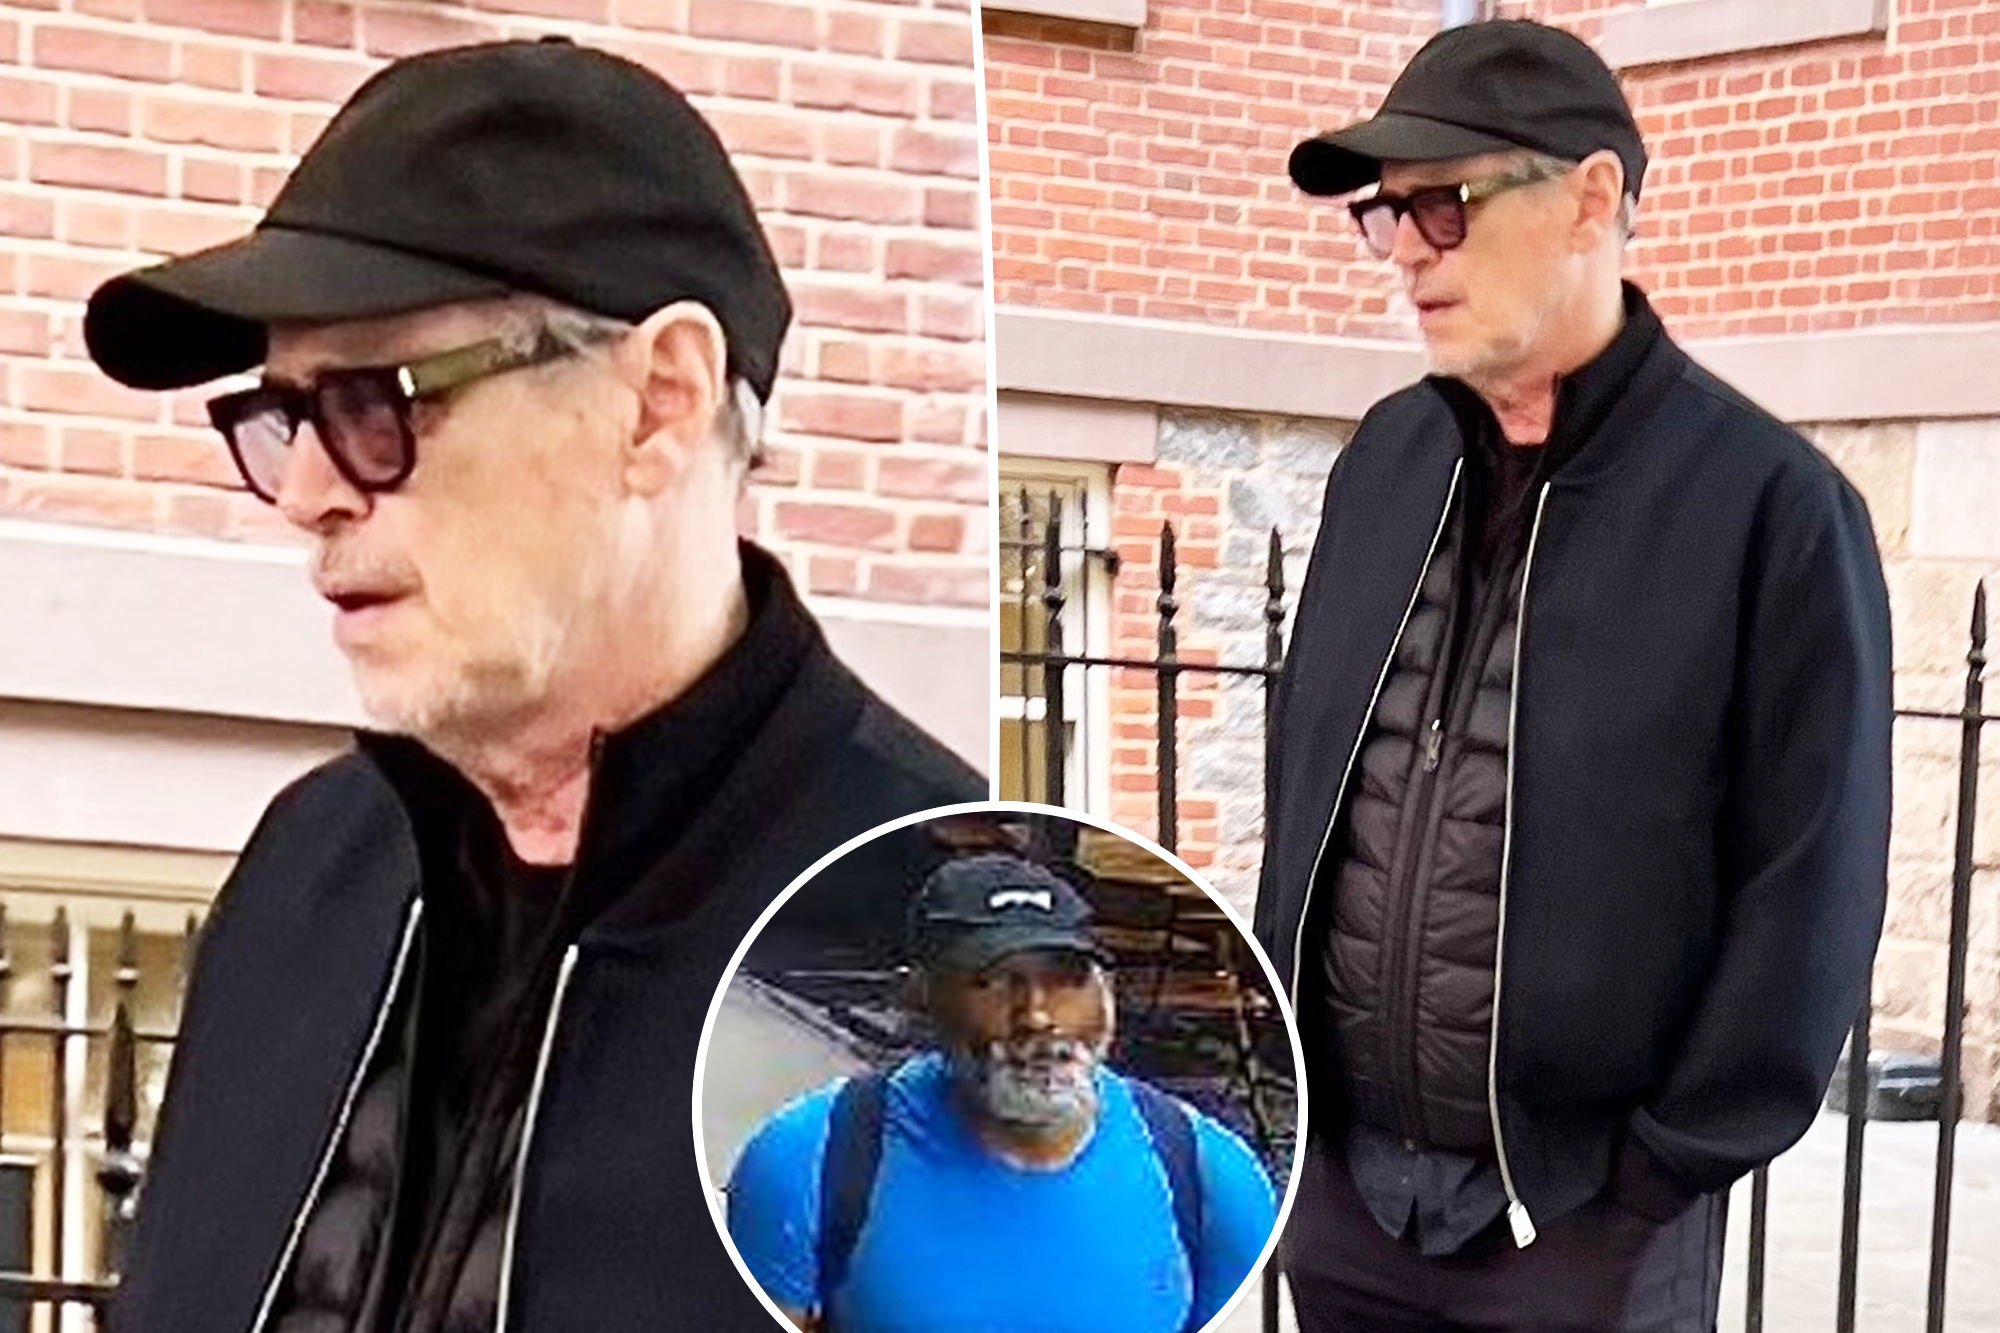 Steve Buscemi Recovers After Random NYC Attack